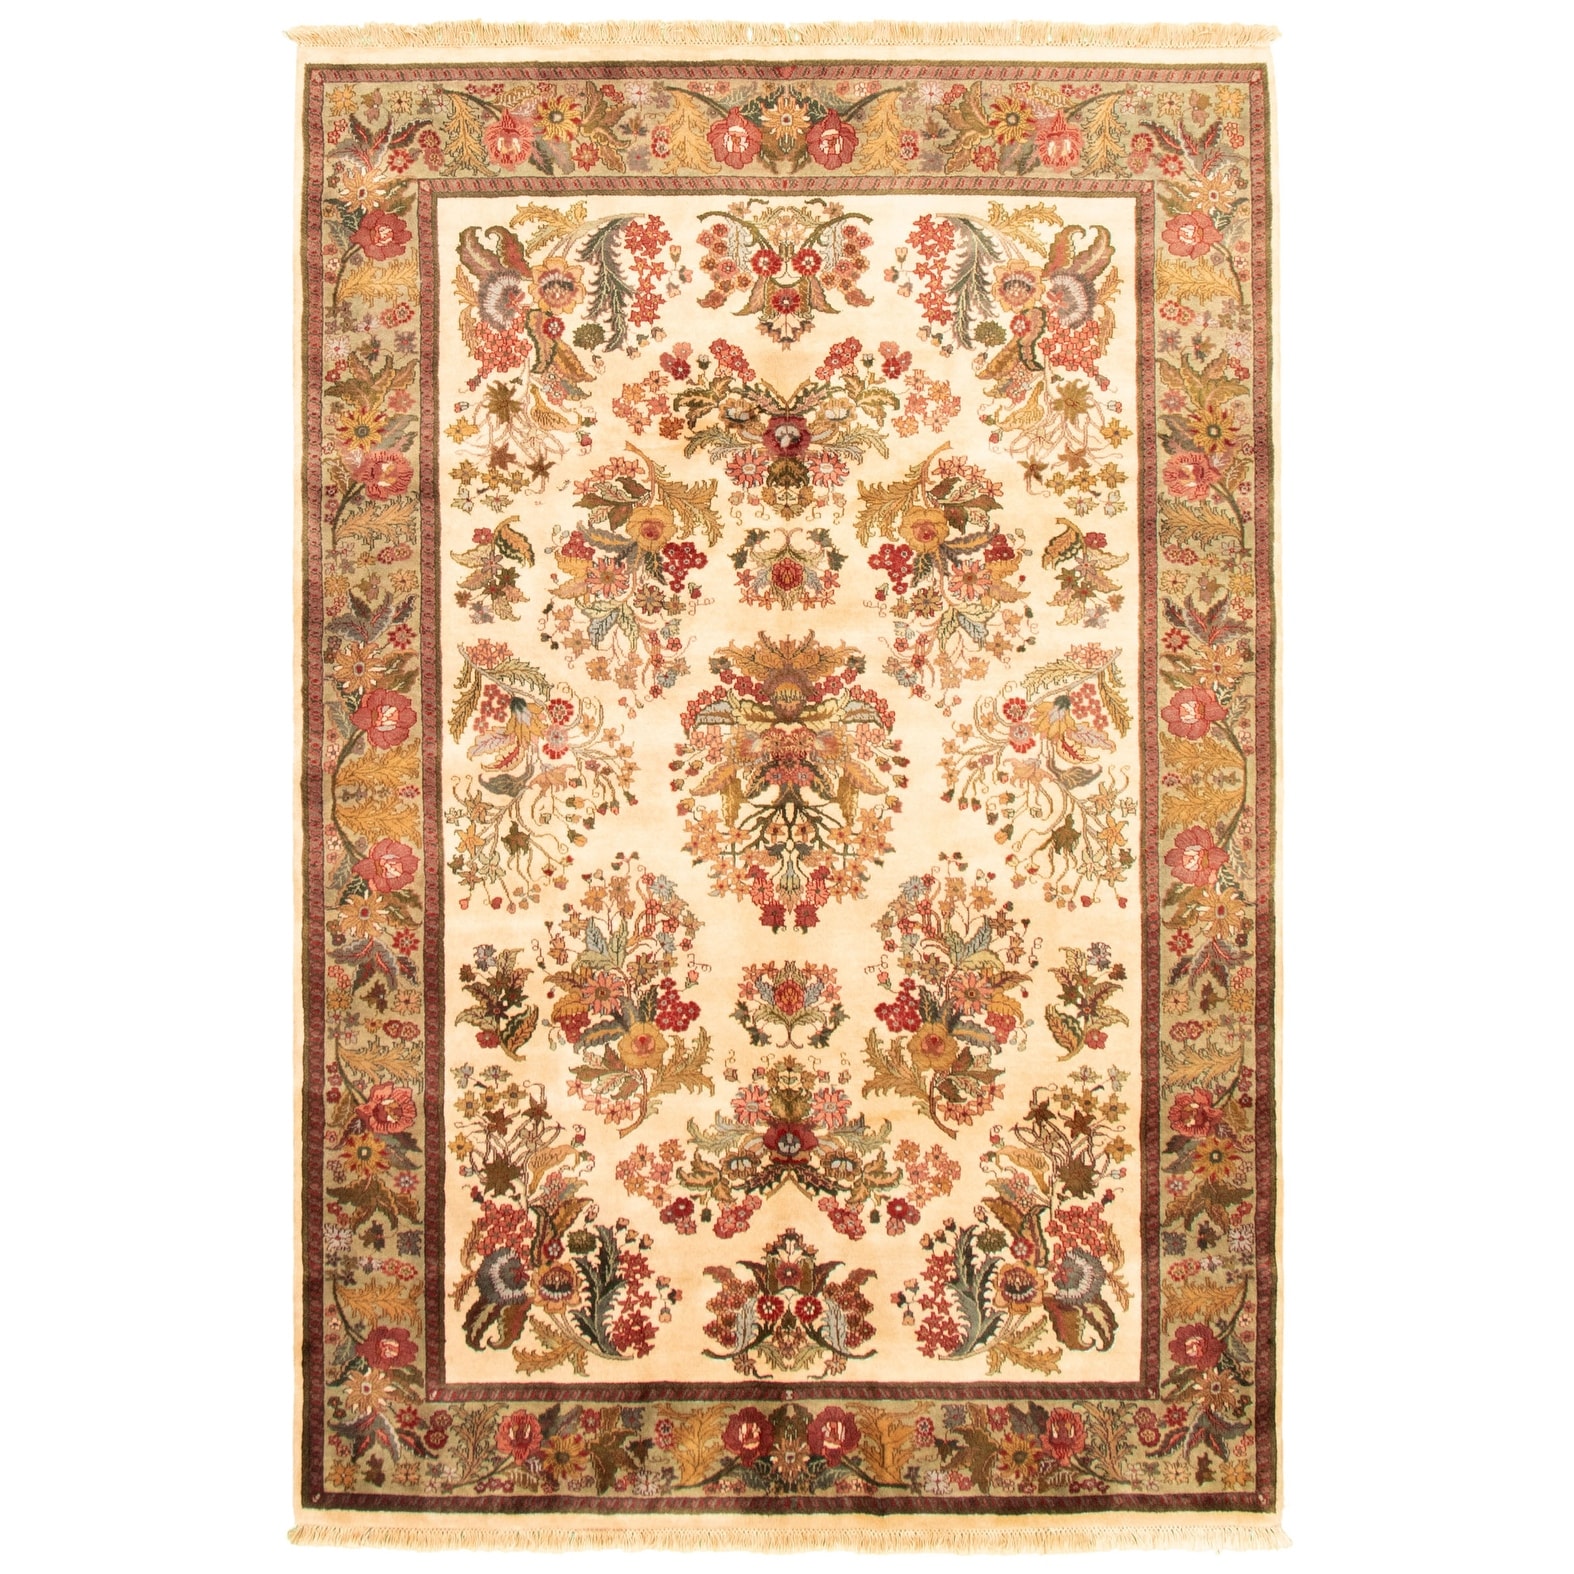 3'0 x 4'10 Bordered Red Area Rug 356169 eCarpet Gallery 